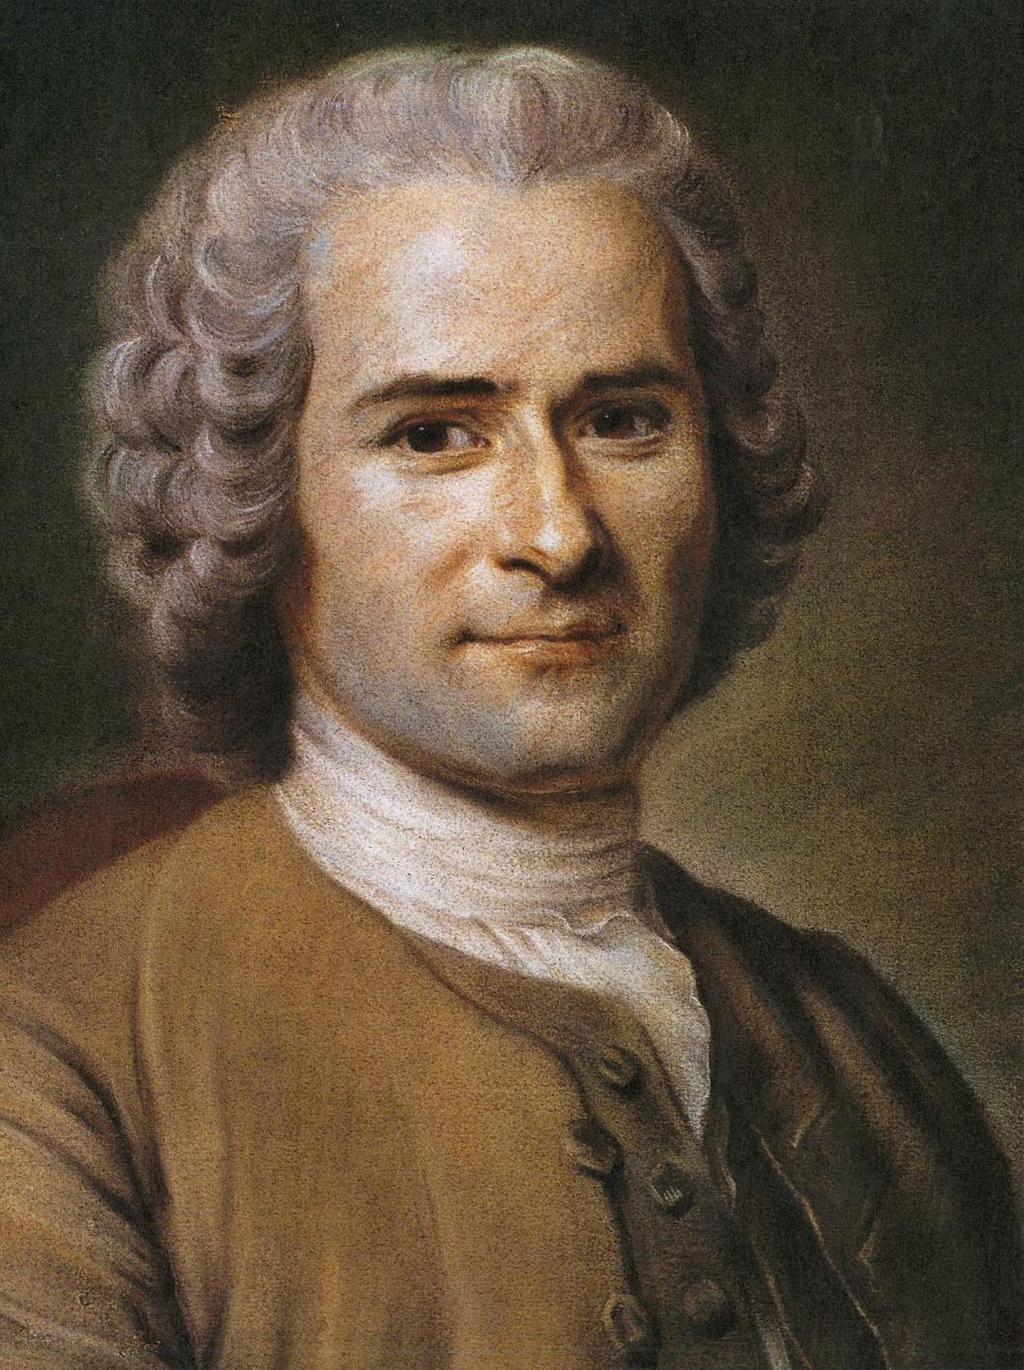 Political Philosophers; Jean Rousseau Said people should give up natural rights in favor of a social contract.